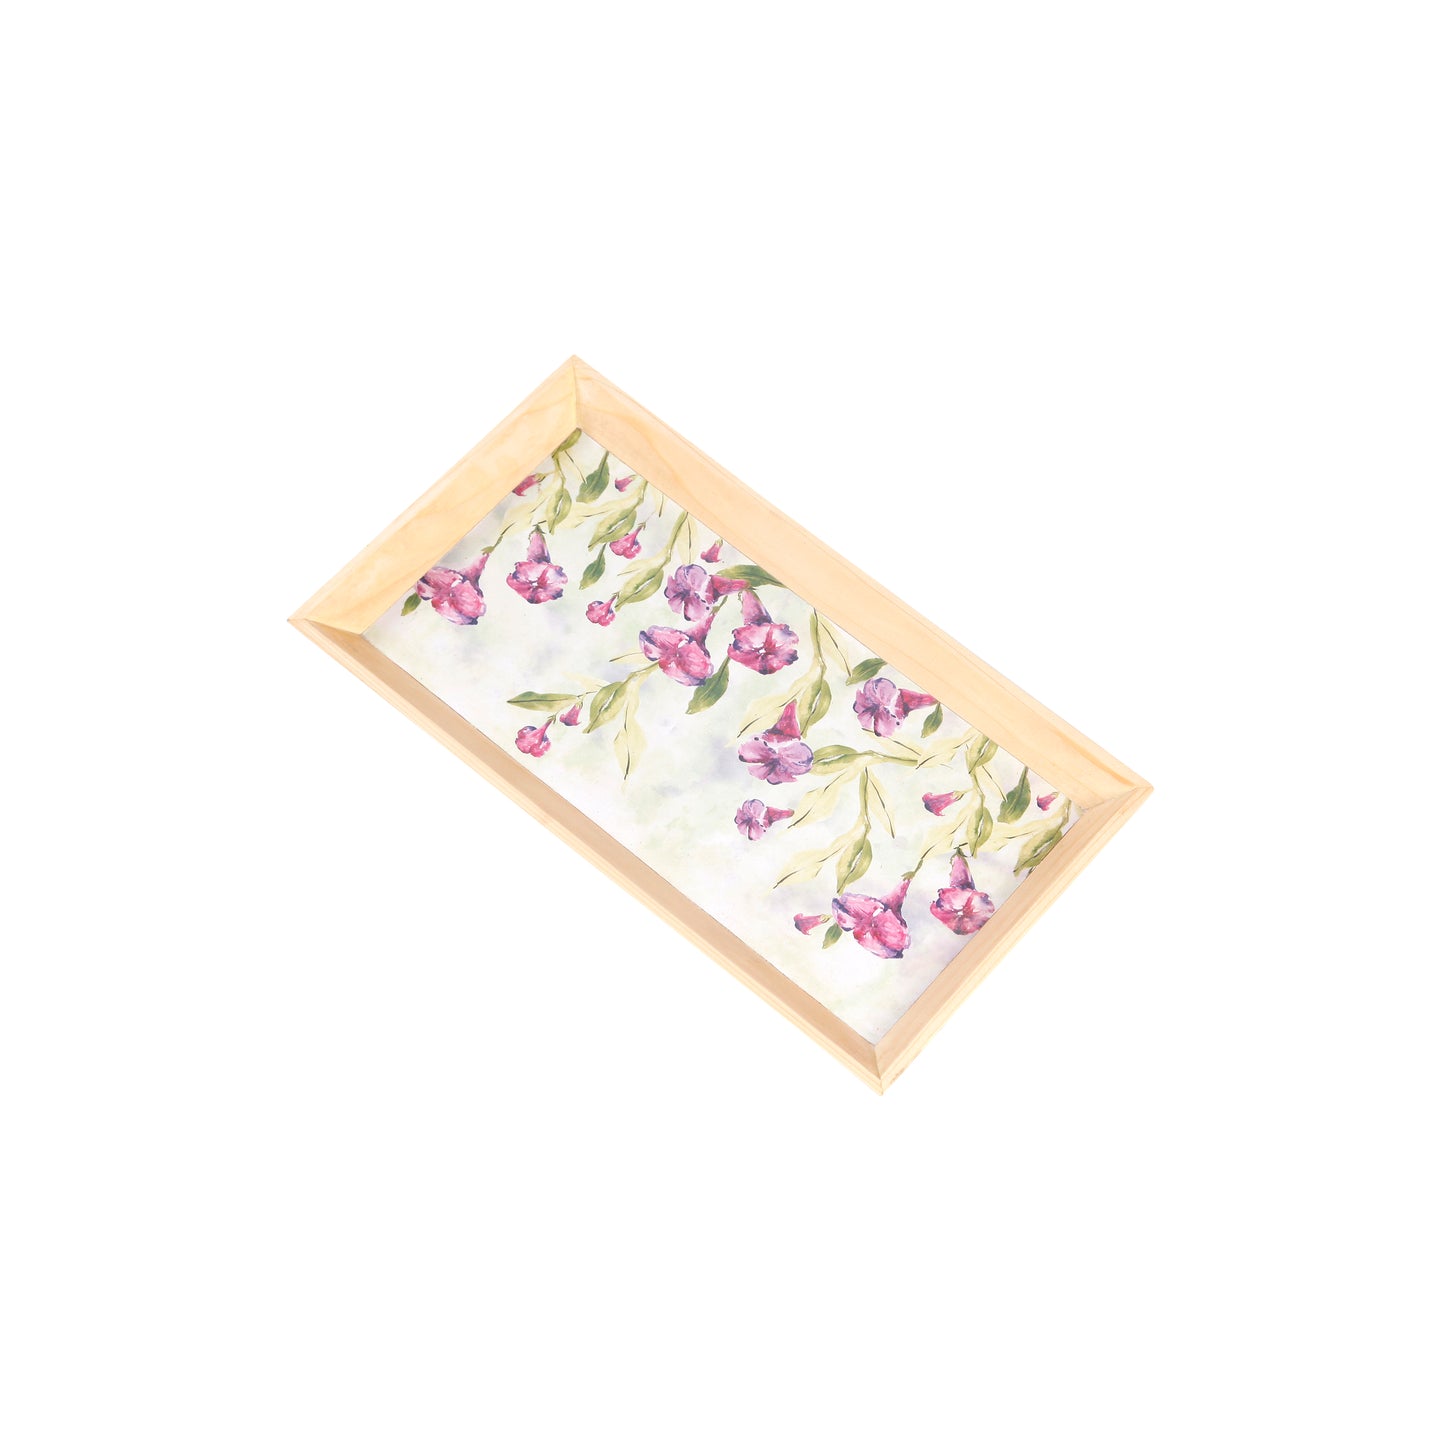 A Tiny Mistake Morning Glory Rectangle Wooden Serving Tray, 35 x 20 x 2 cm